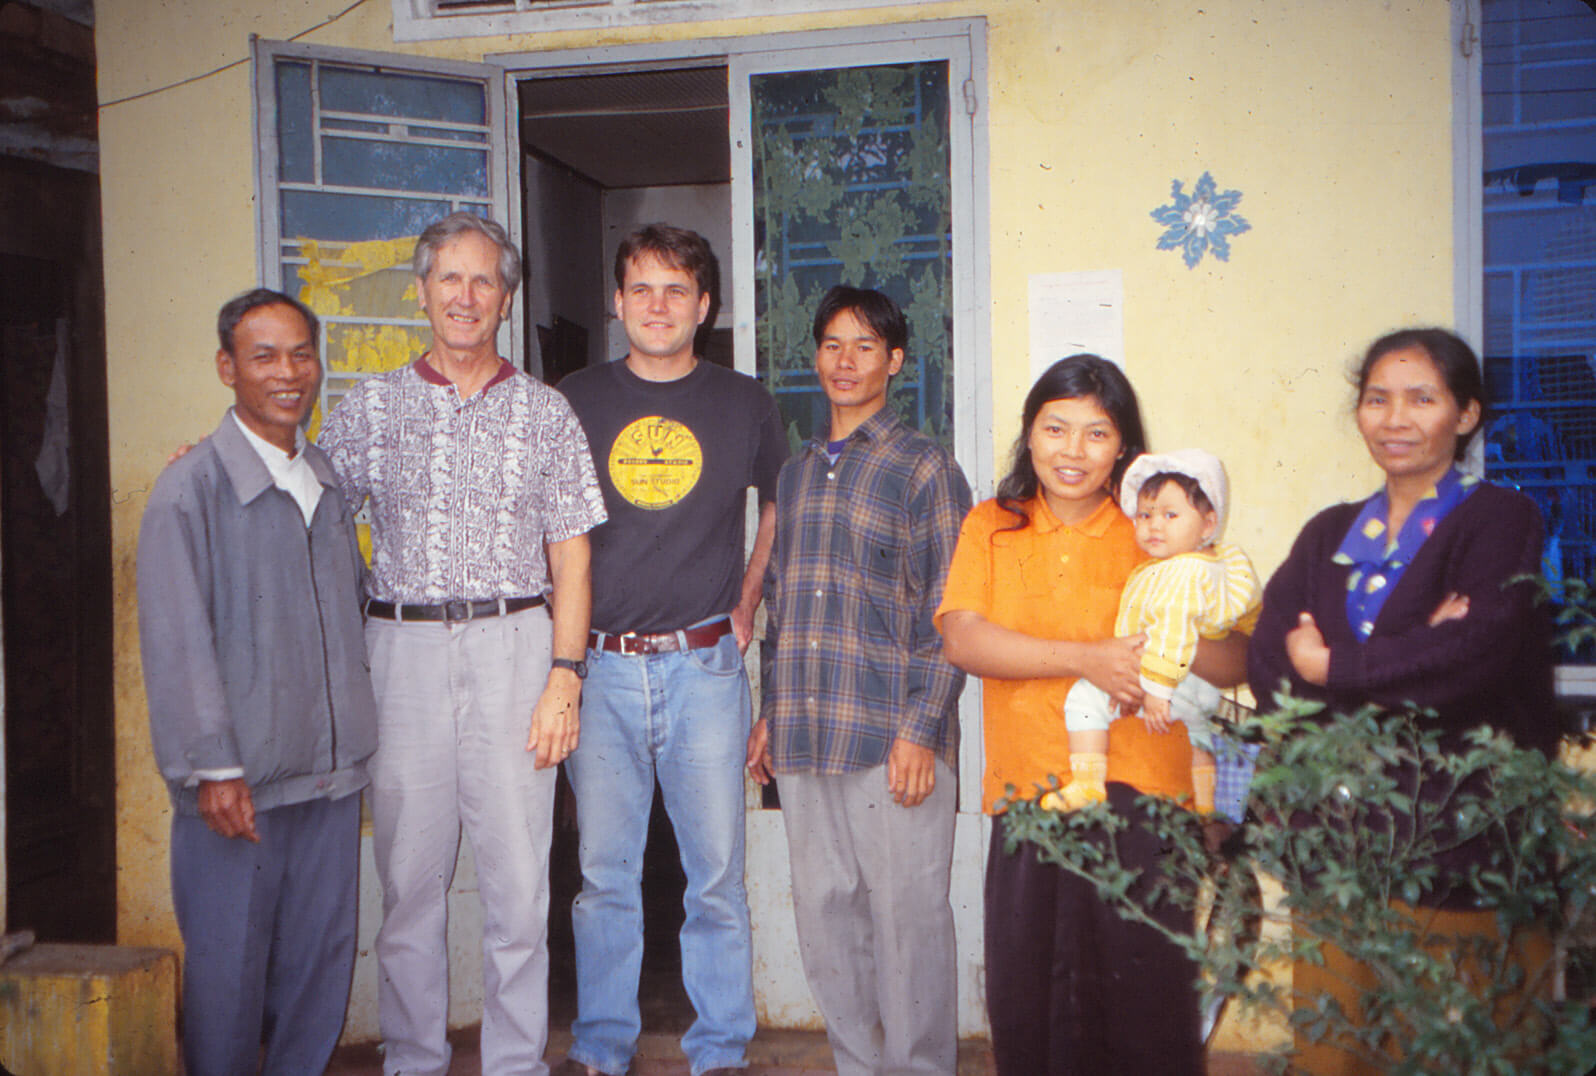 Two white men and an Asian family of 5 standing outside a yellow house.